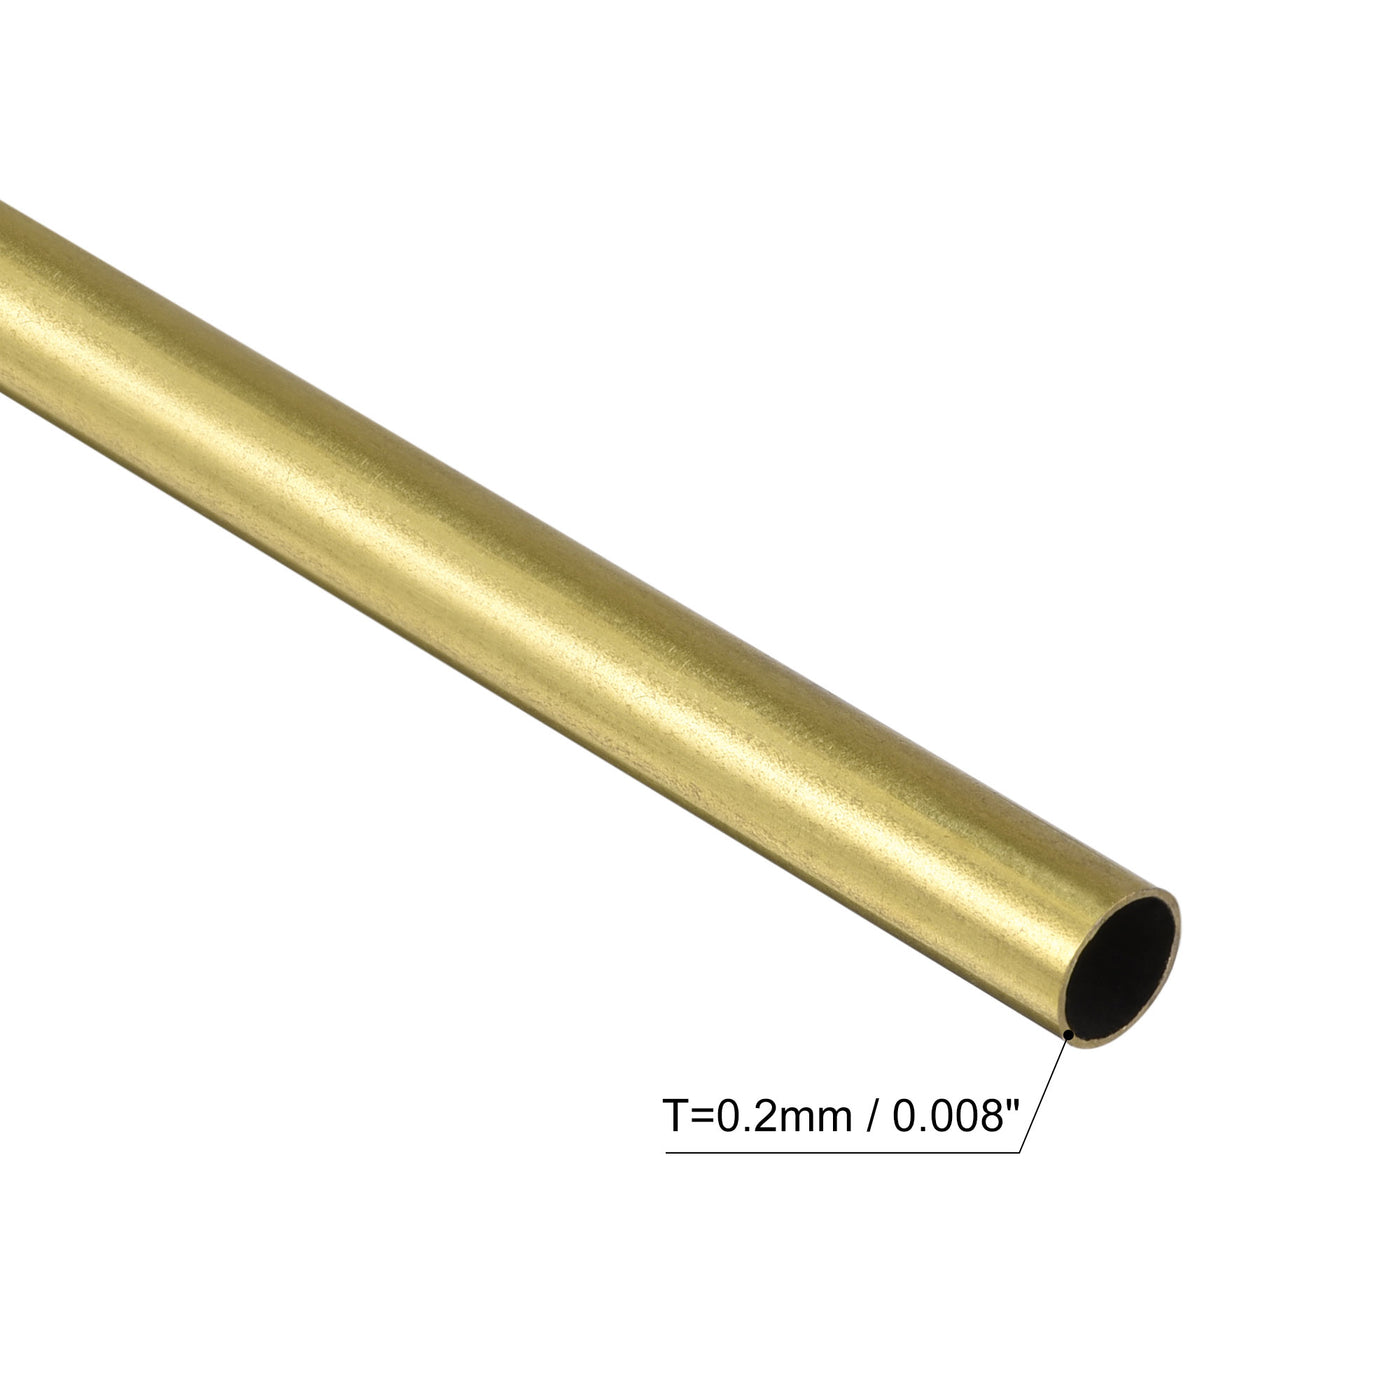 uxcell Uxcell 3Pcs 4mm x 0.2mm x 400mm Seamless Straight Brass Tube for Industry DIY Projects